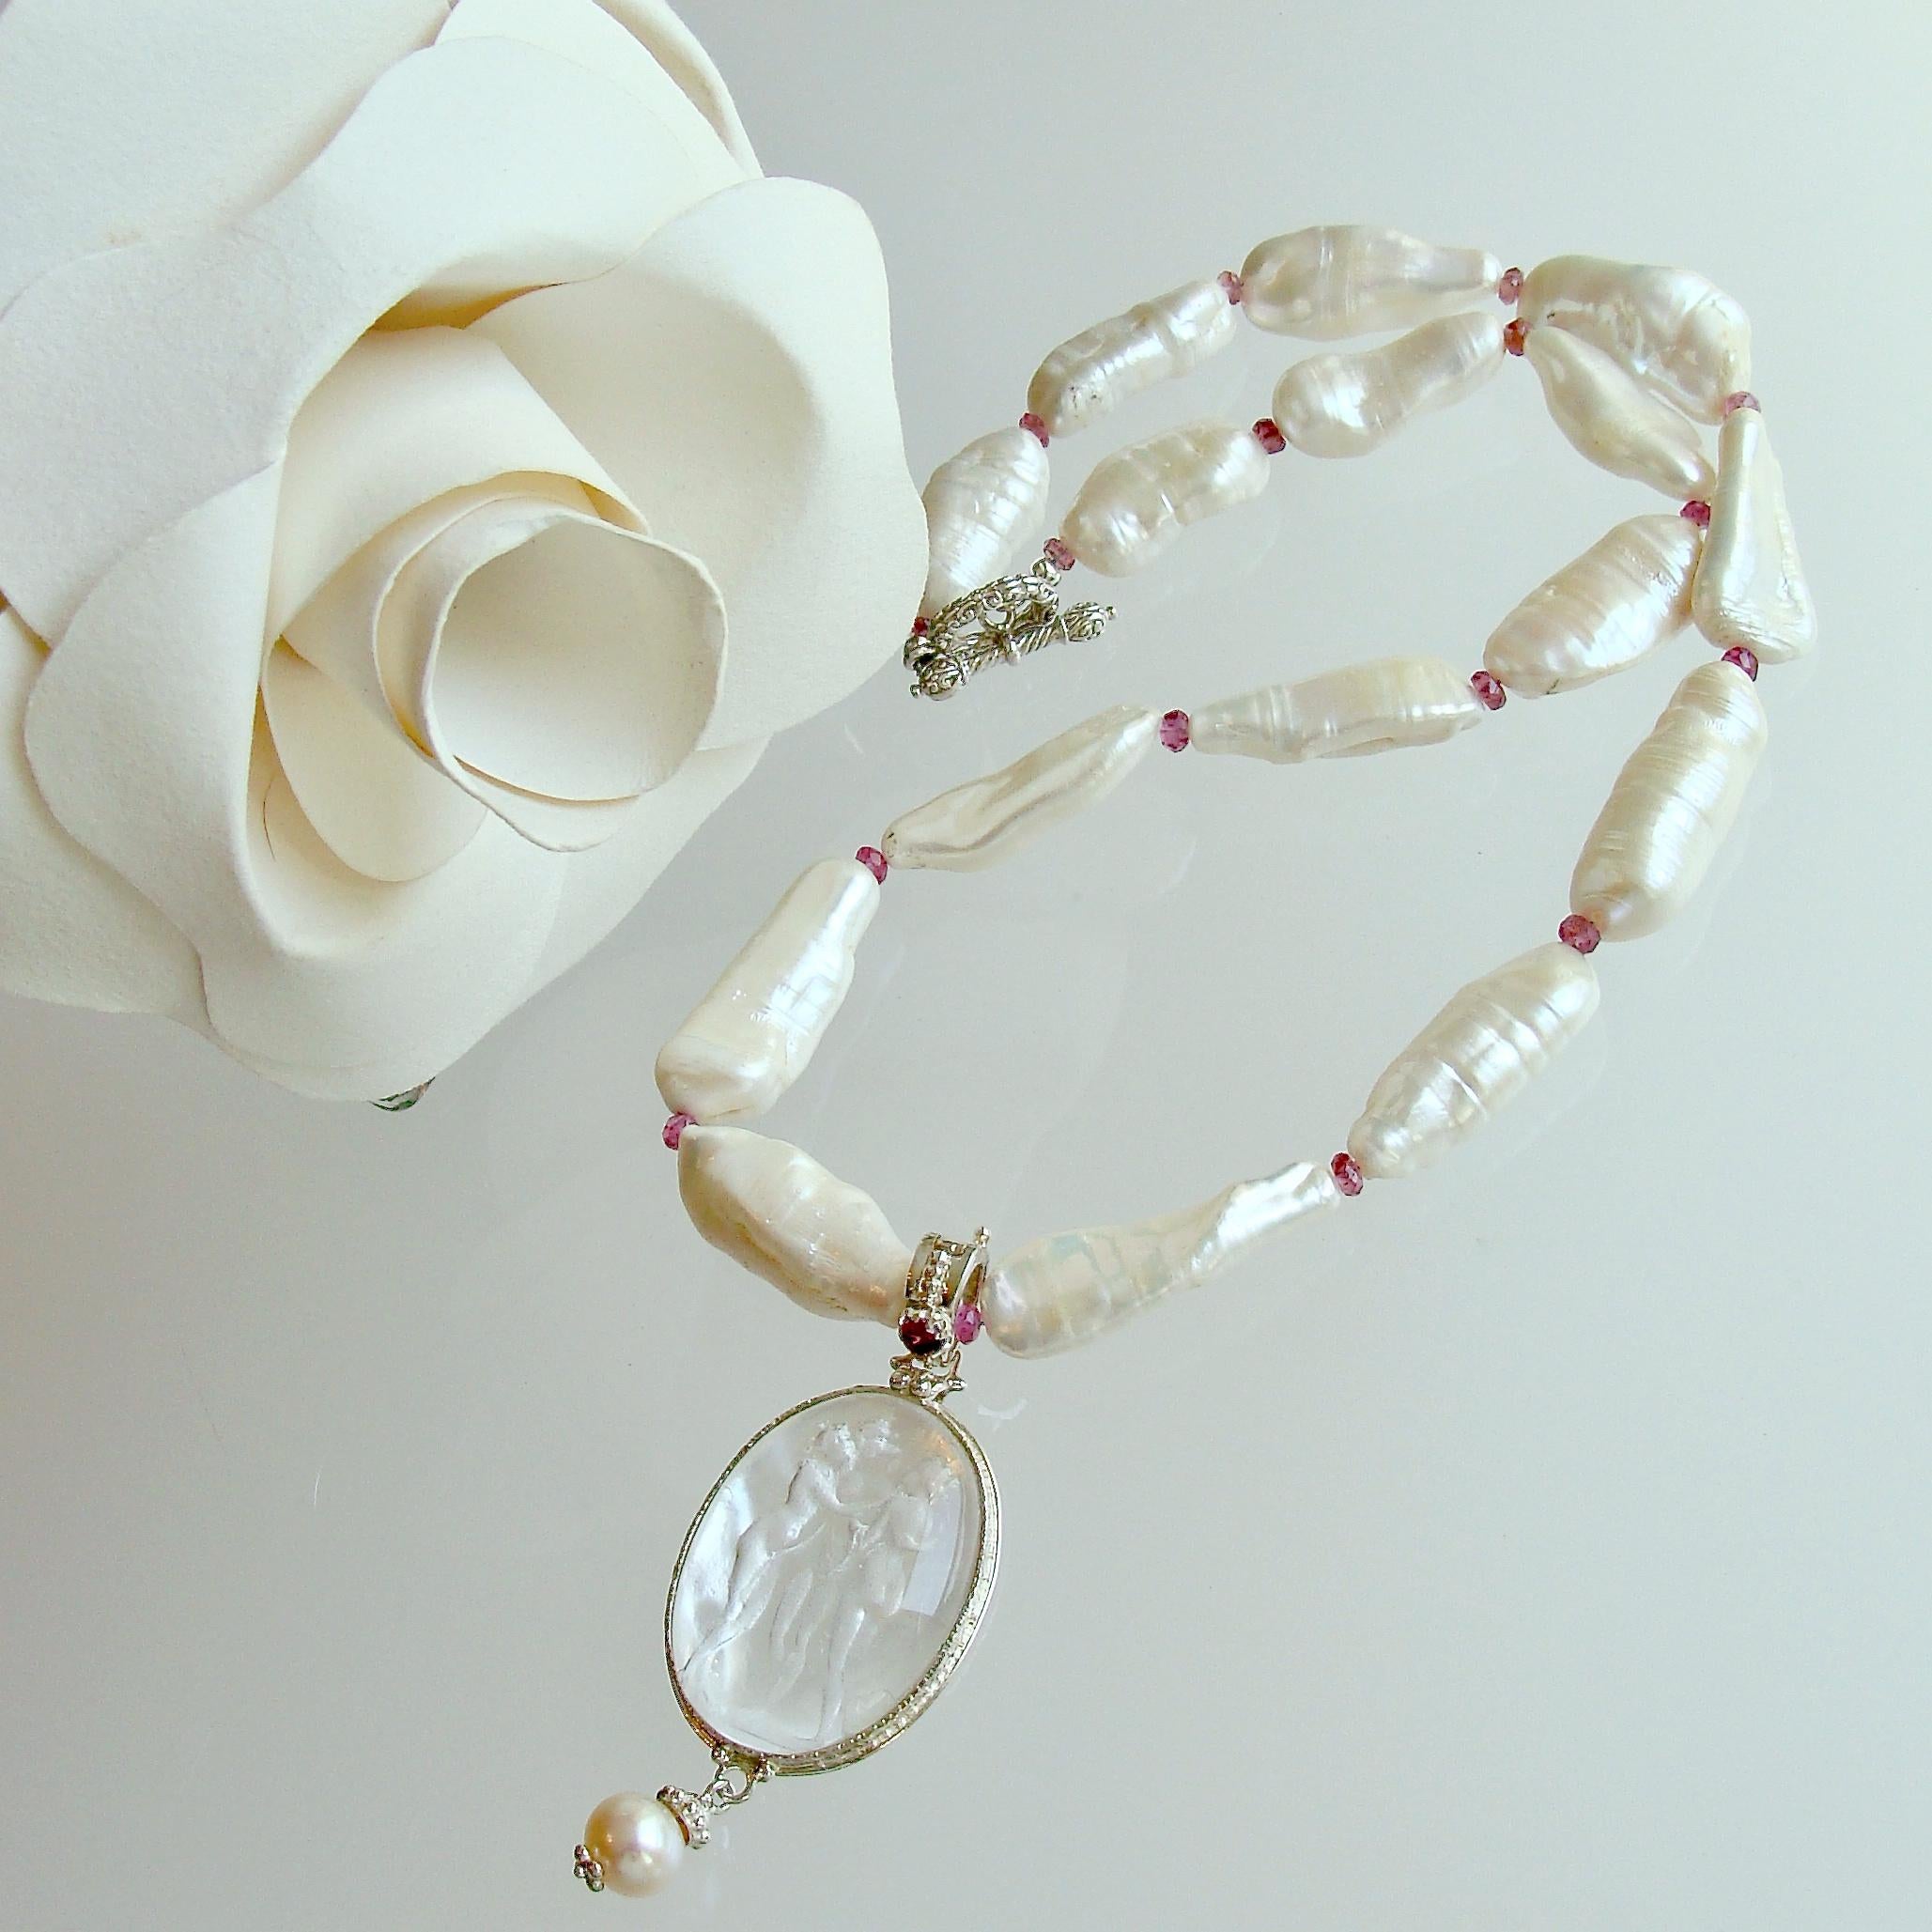 A trail of creamy elongated Biwa Pearls have been separated with small rondelles of pink tourmaline to create this lovely and wedding—worthy necklace.  The culmination of this design is a white Venetian intaglio (backed with Mother of Pearl) pendant